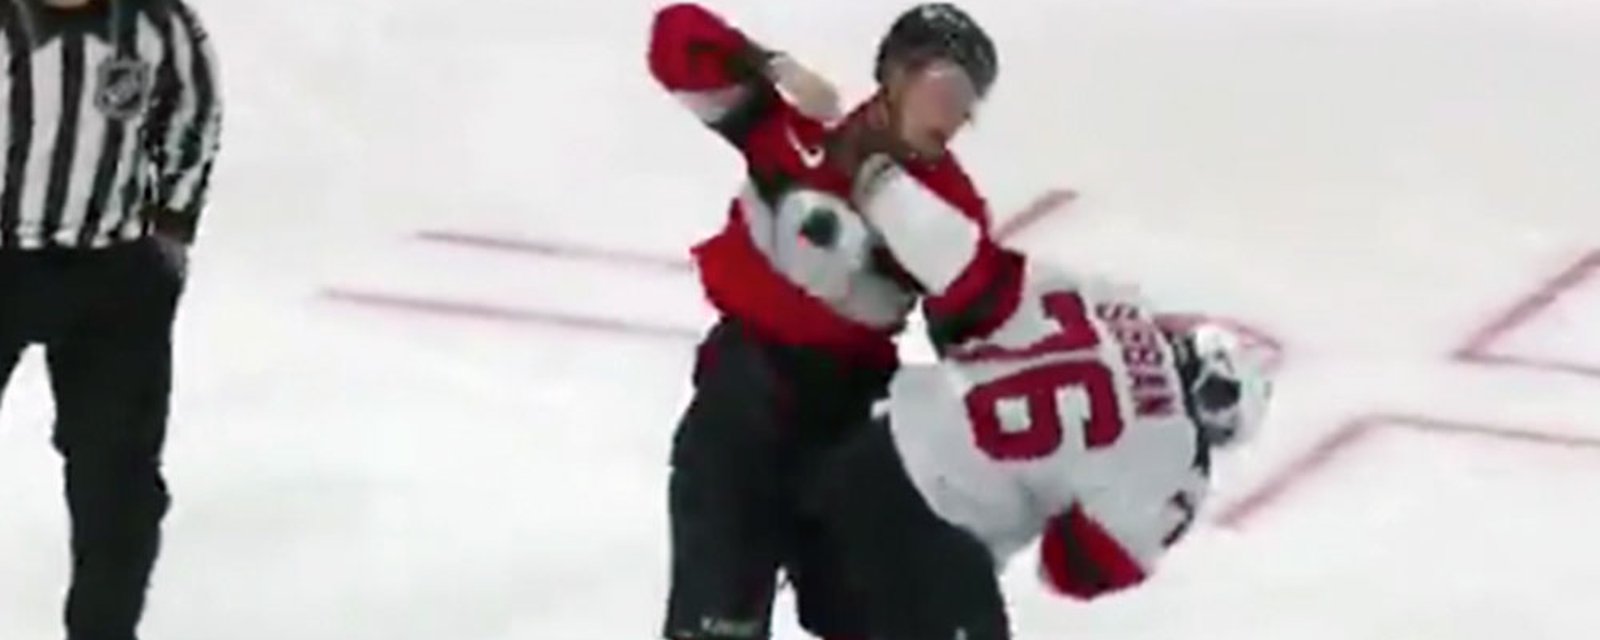 Tkachuk and Subban drop the gloves!